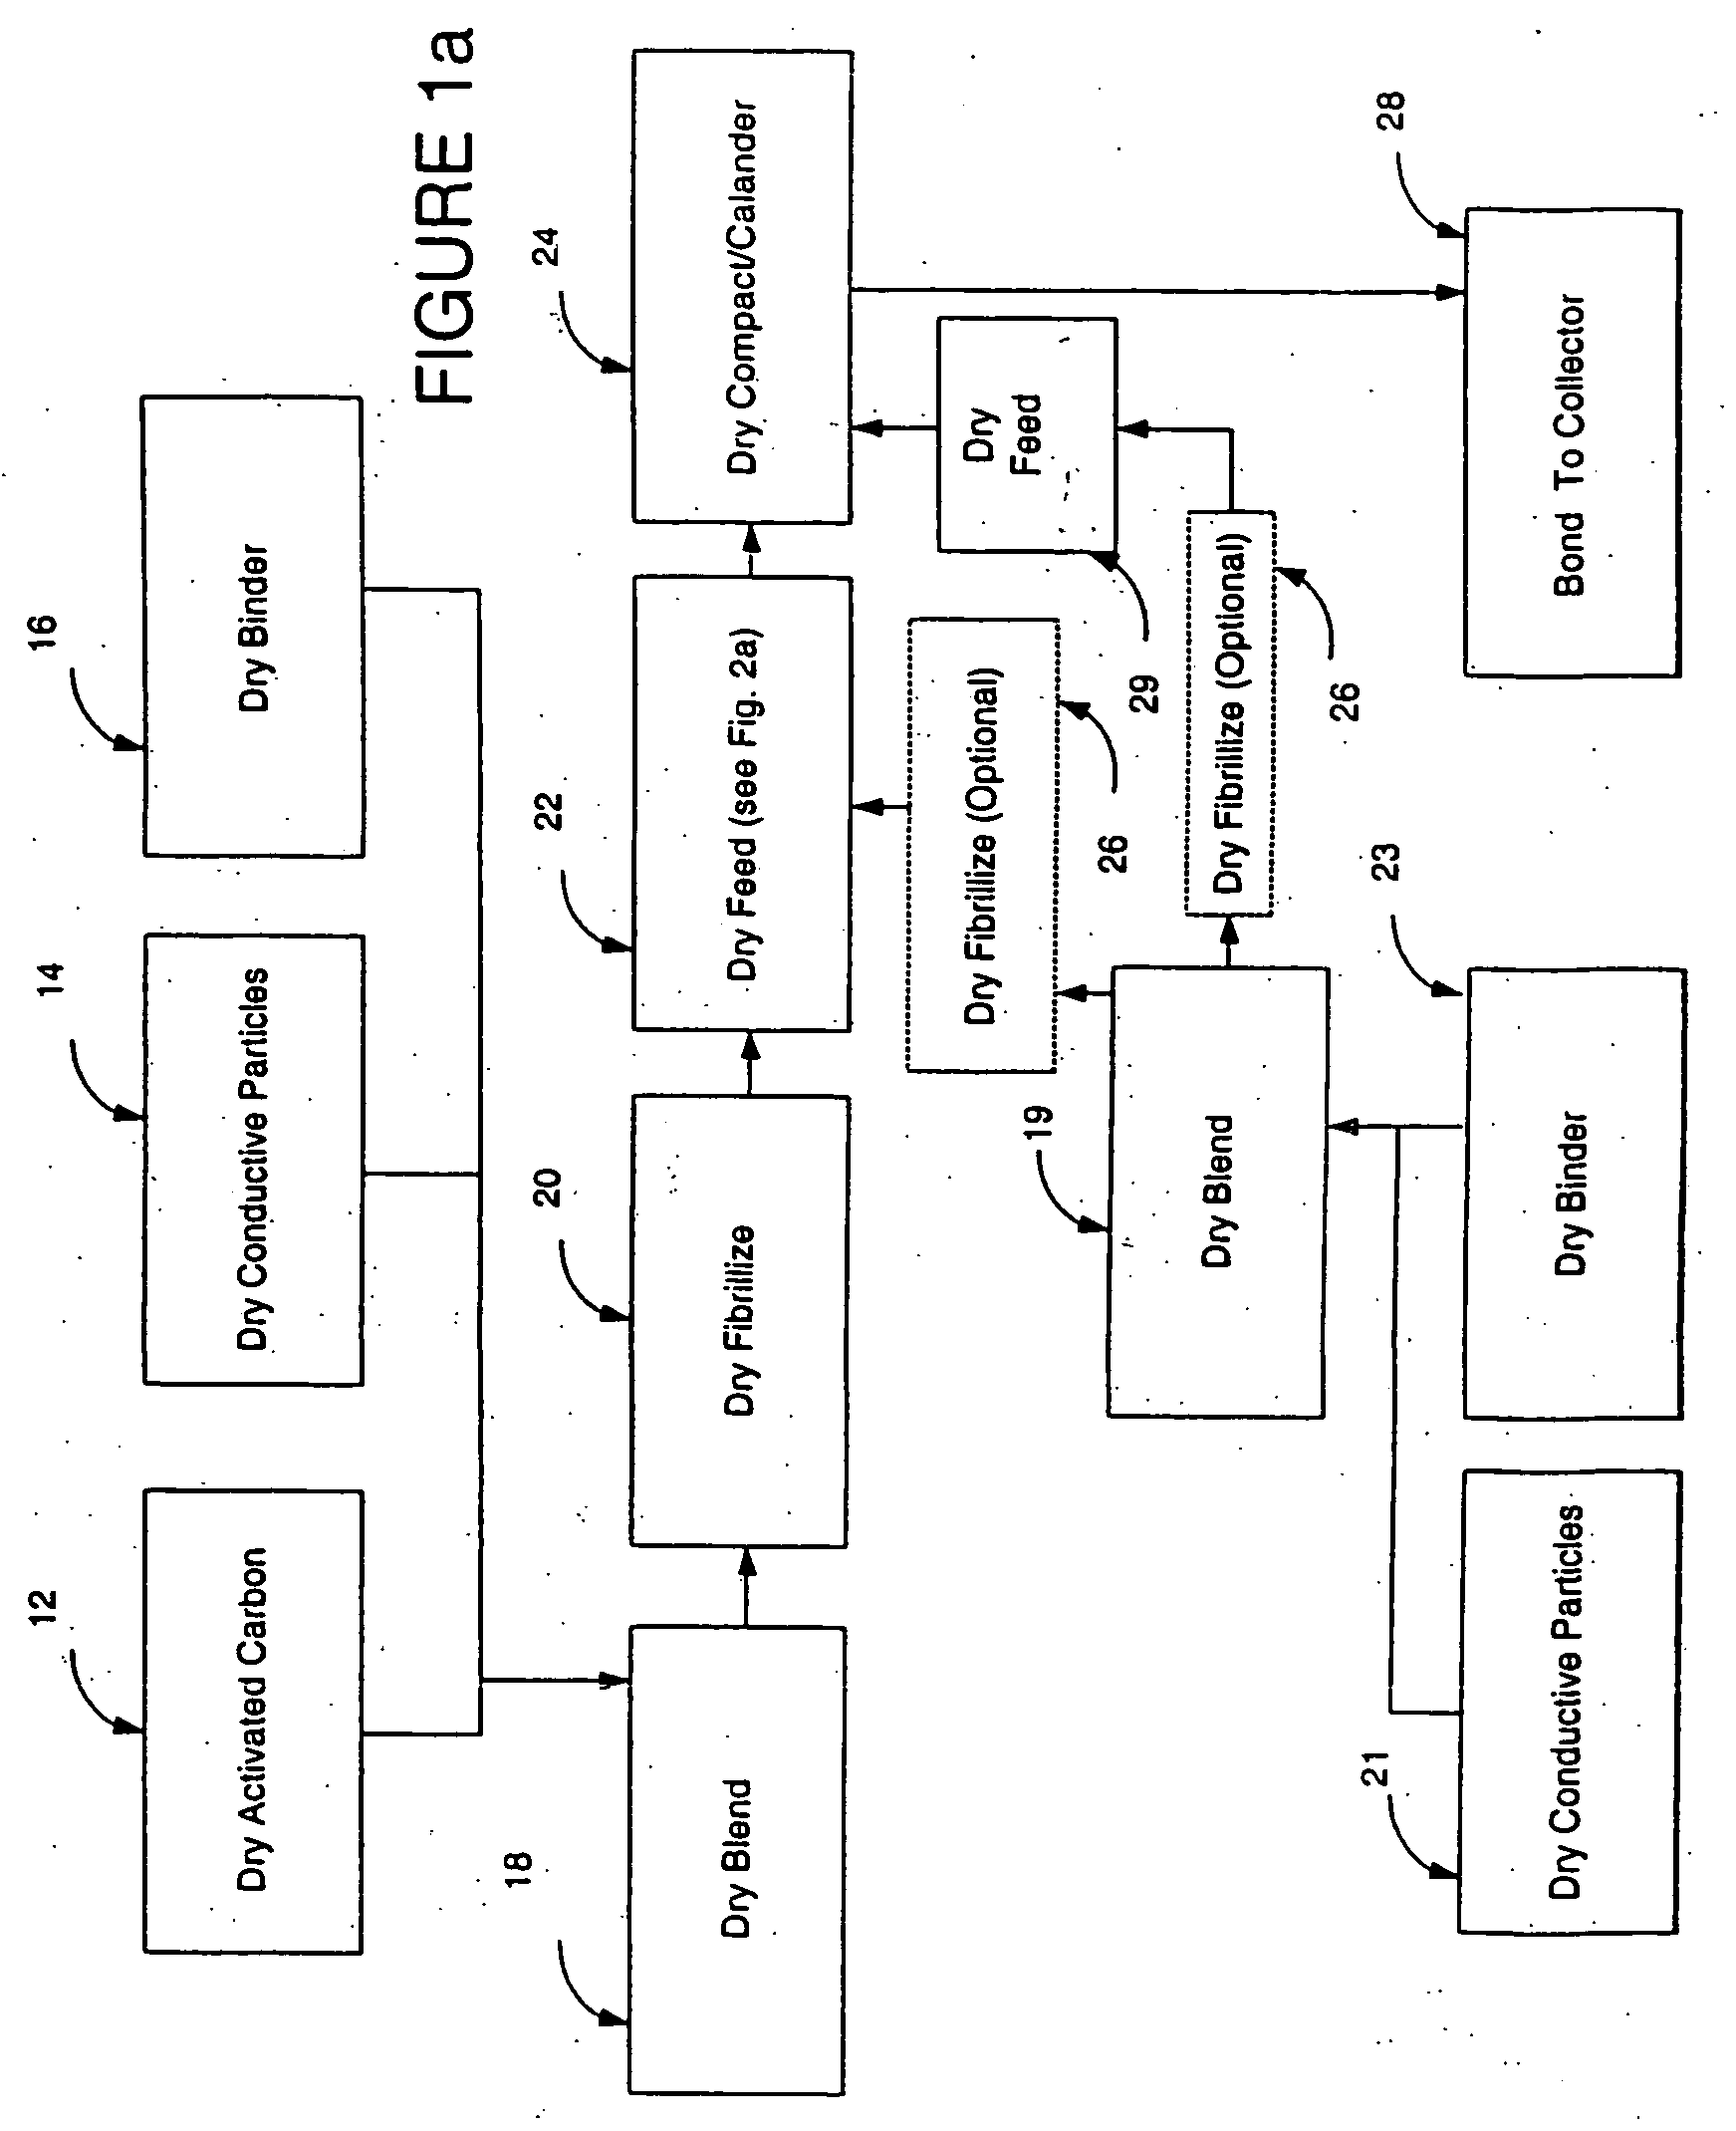 Particle packaging systems and methods